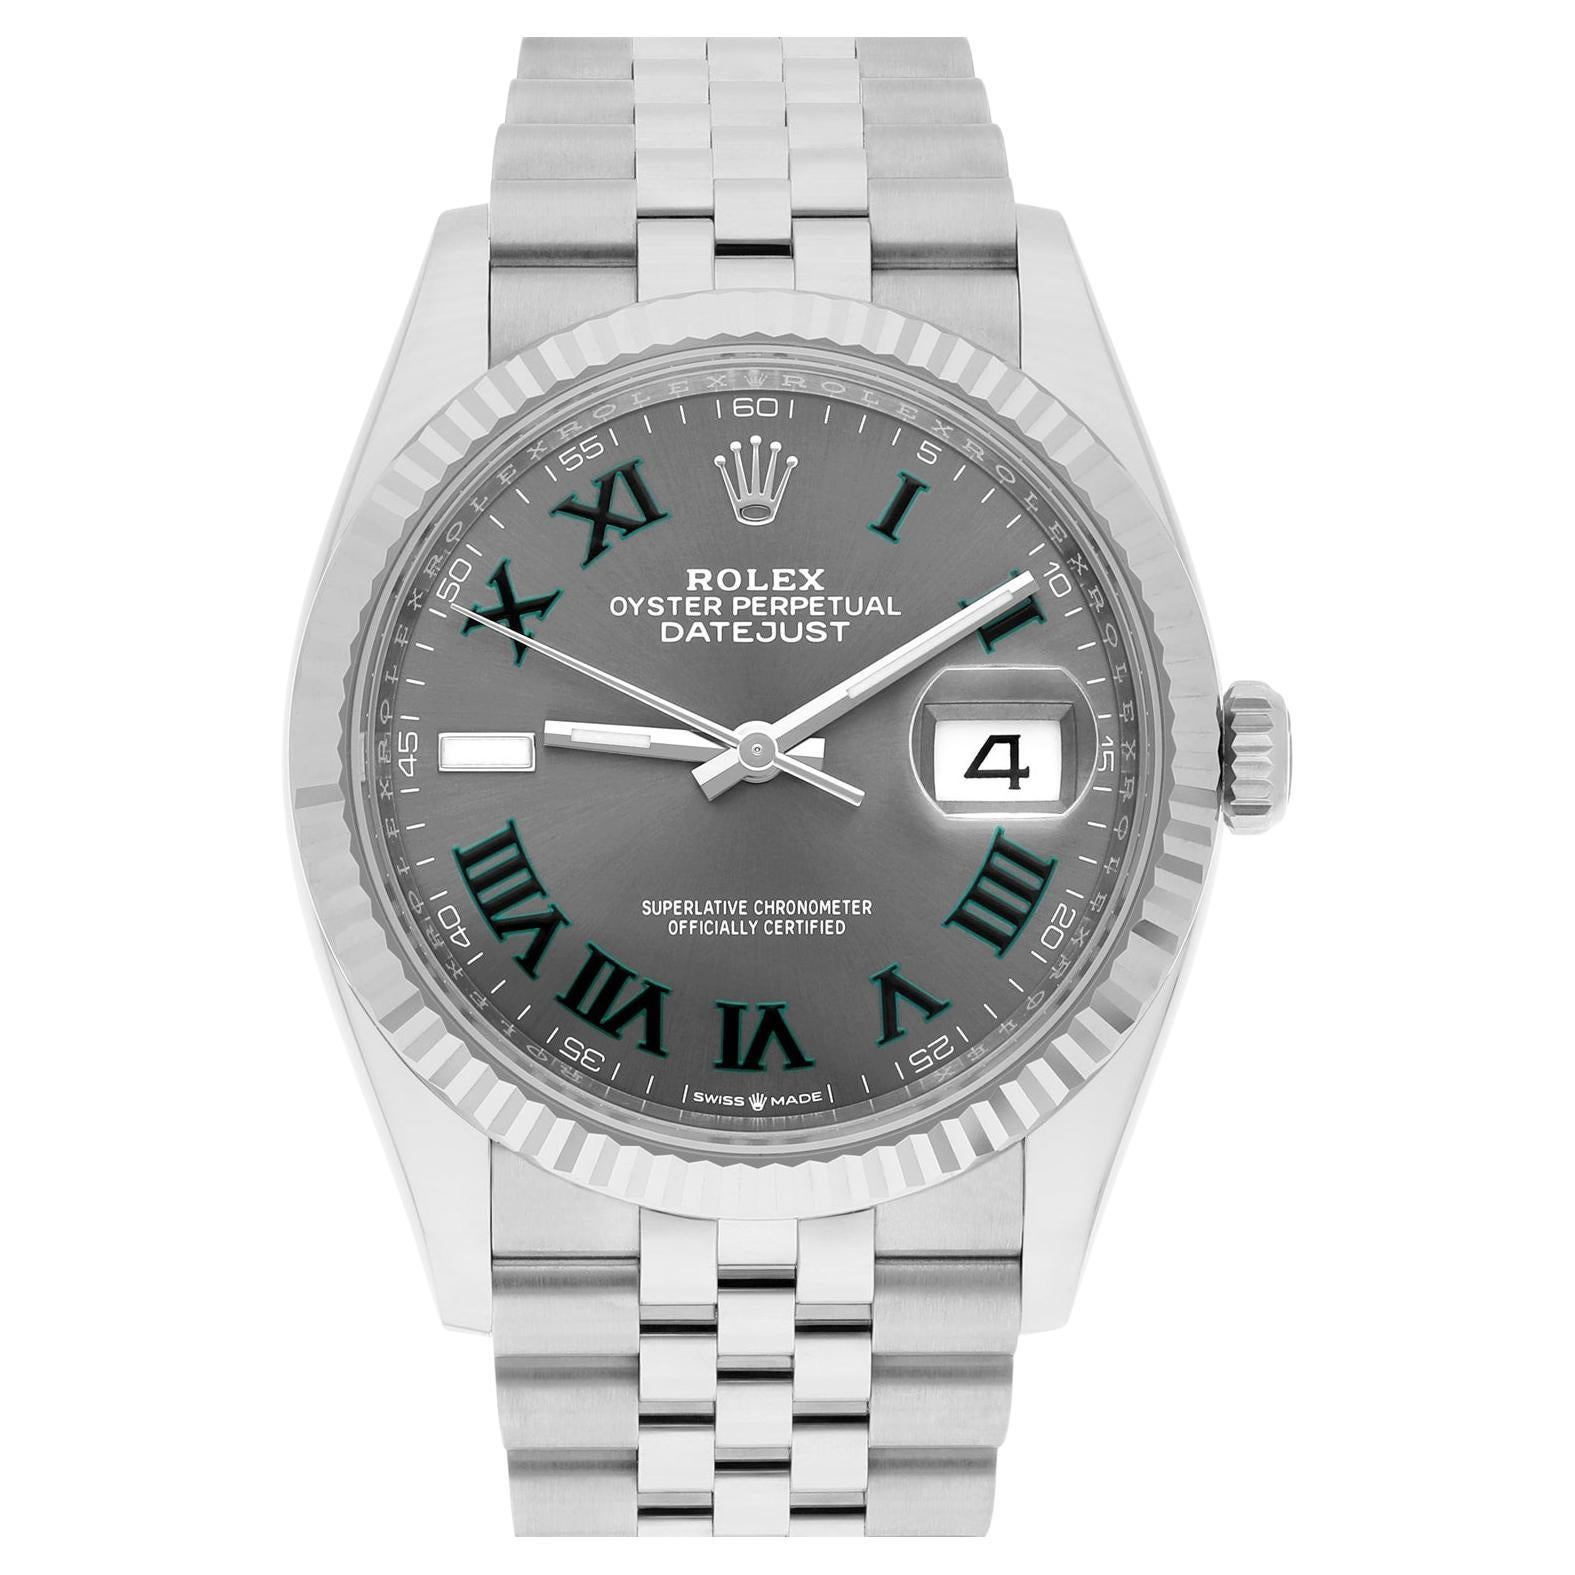 How old are Rolex watches?